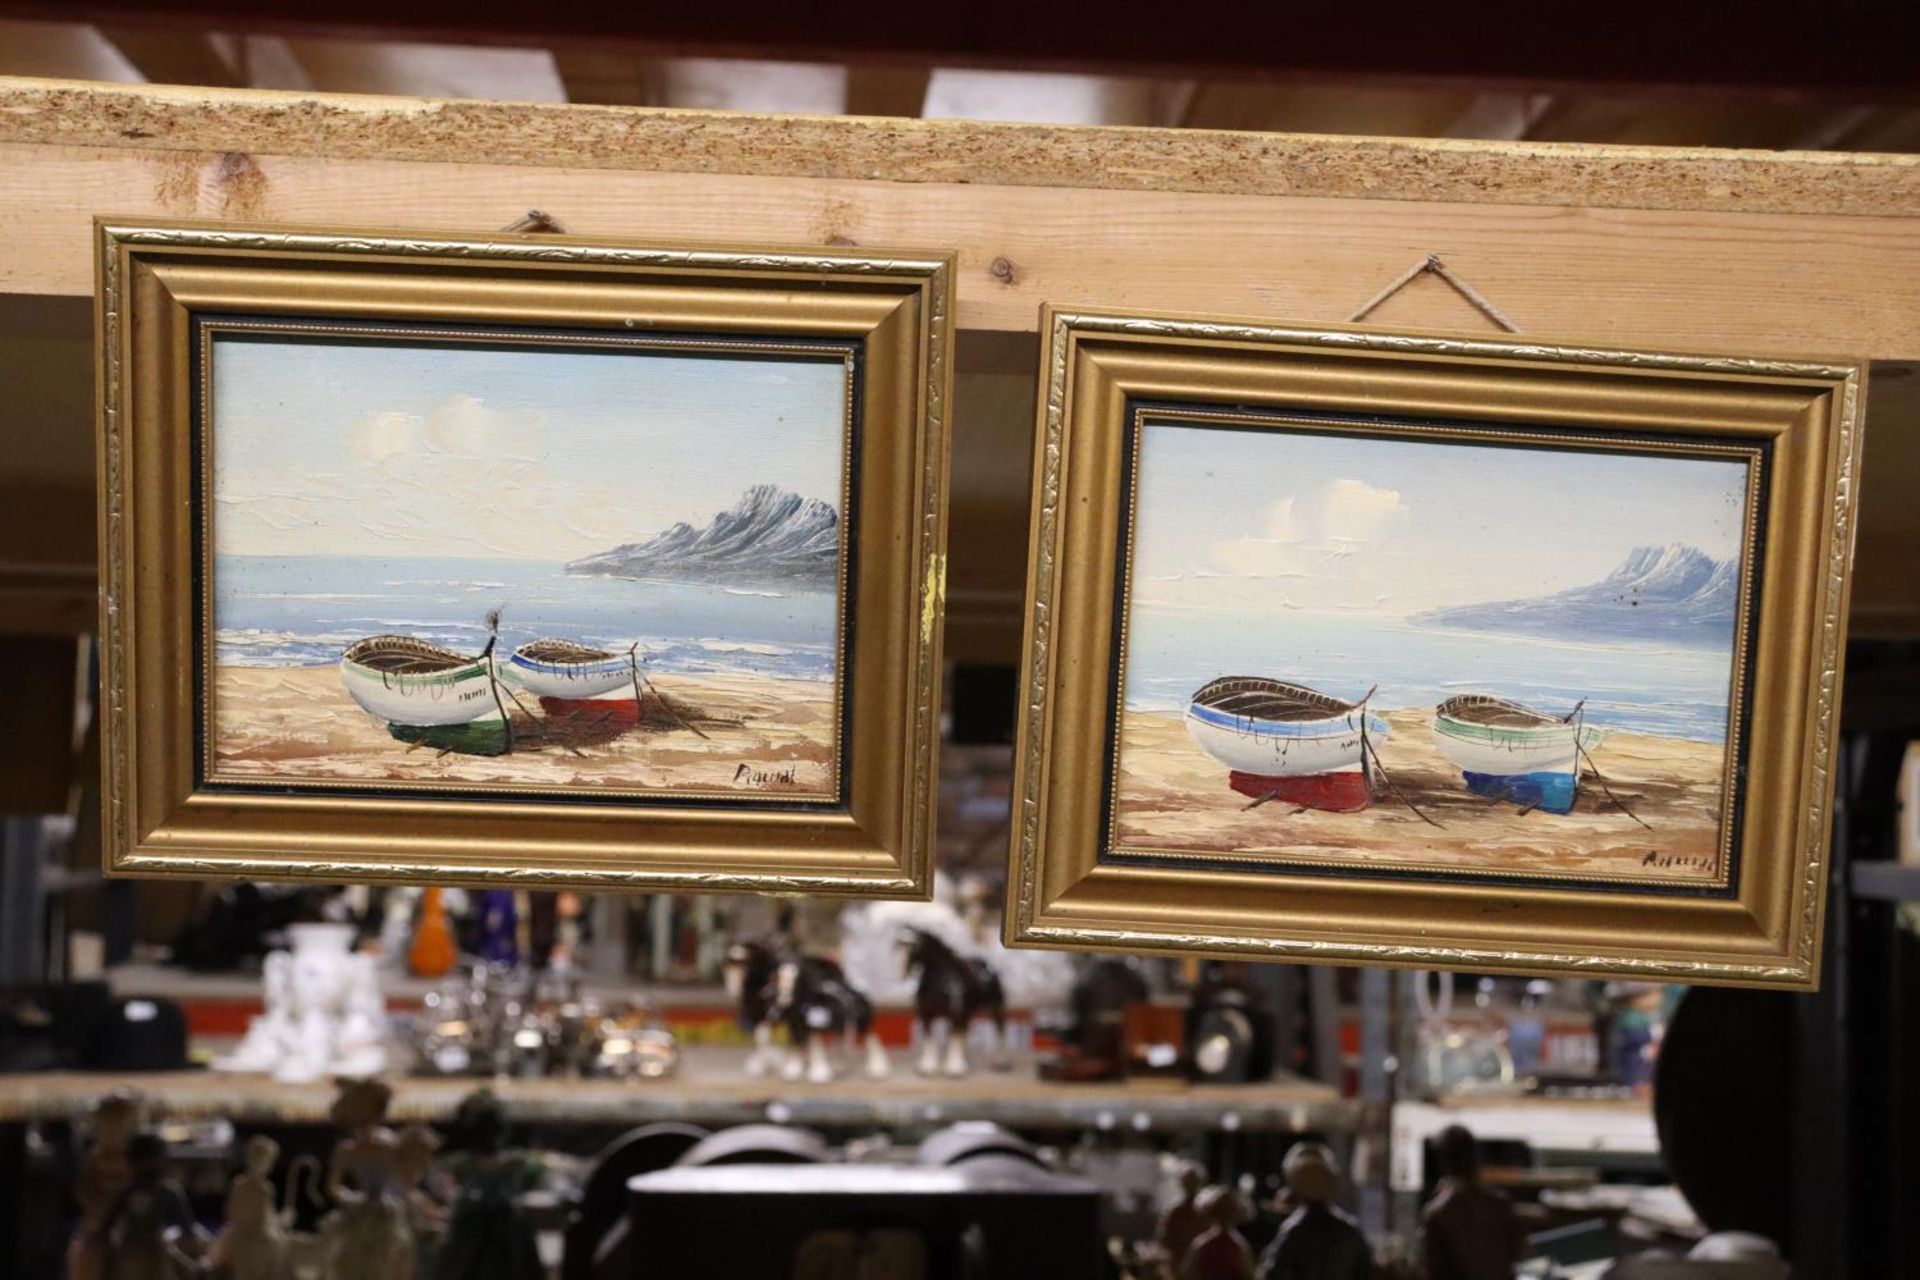 TWO FRAMED MINIATURE OIL ON CANVASES OF BEACH SCENE - INDISTINGUISHABLE SIGNATURE